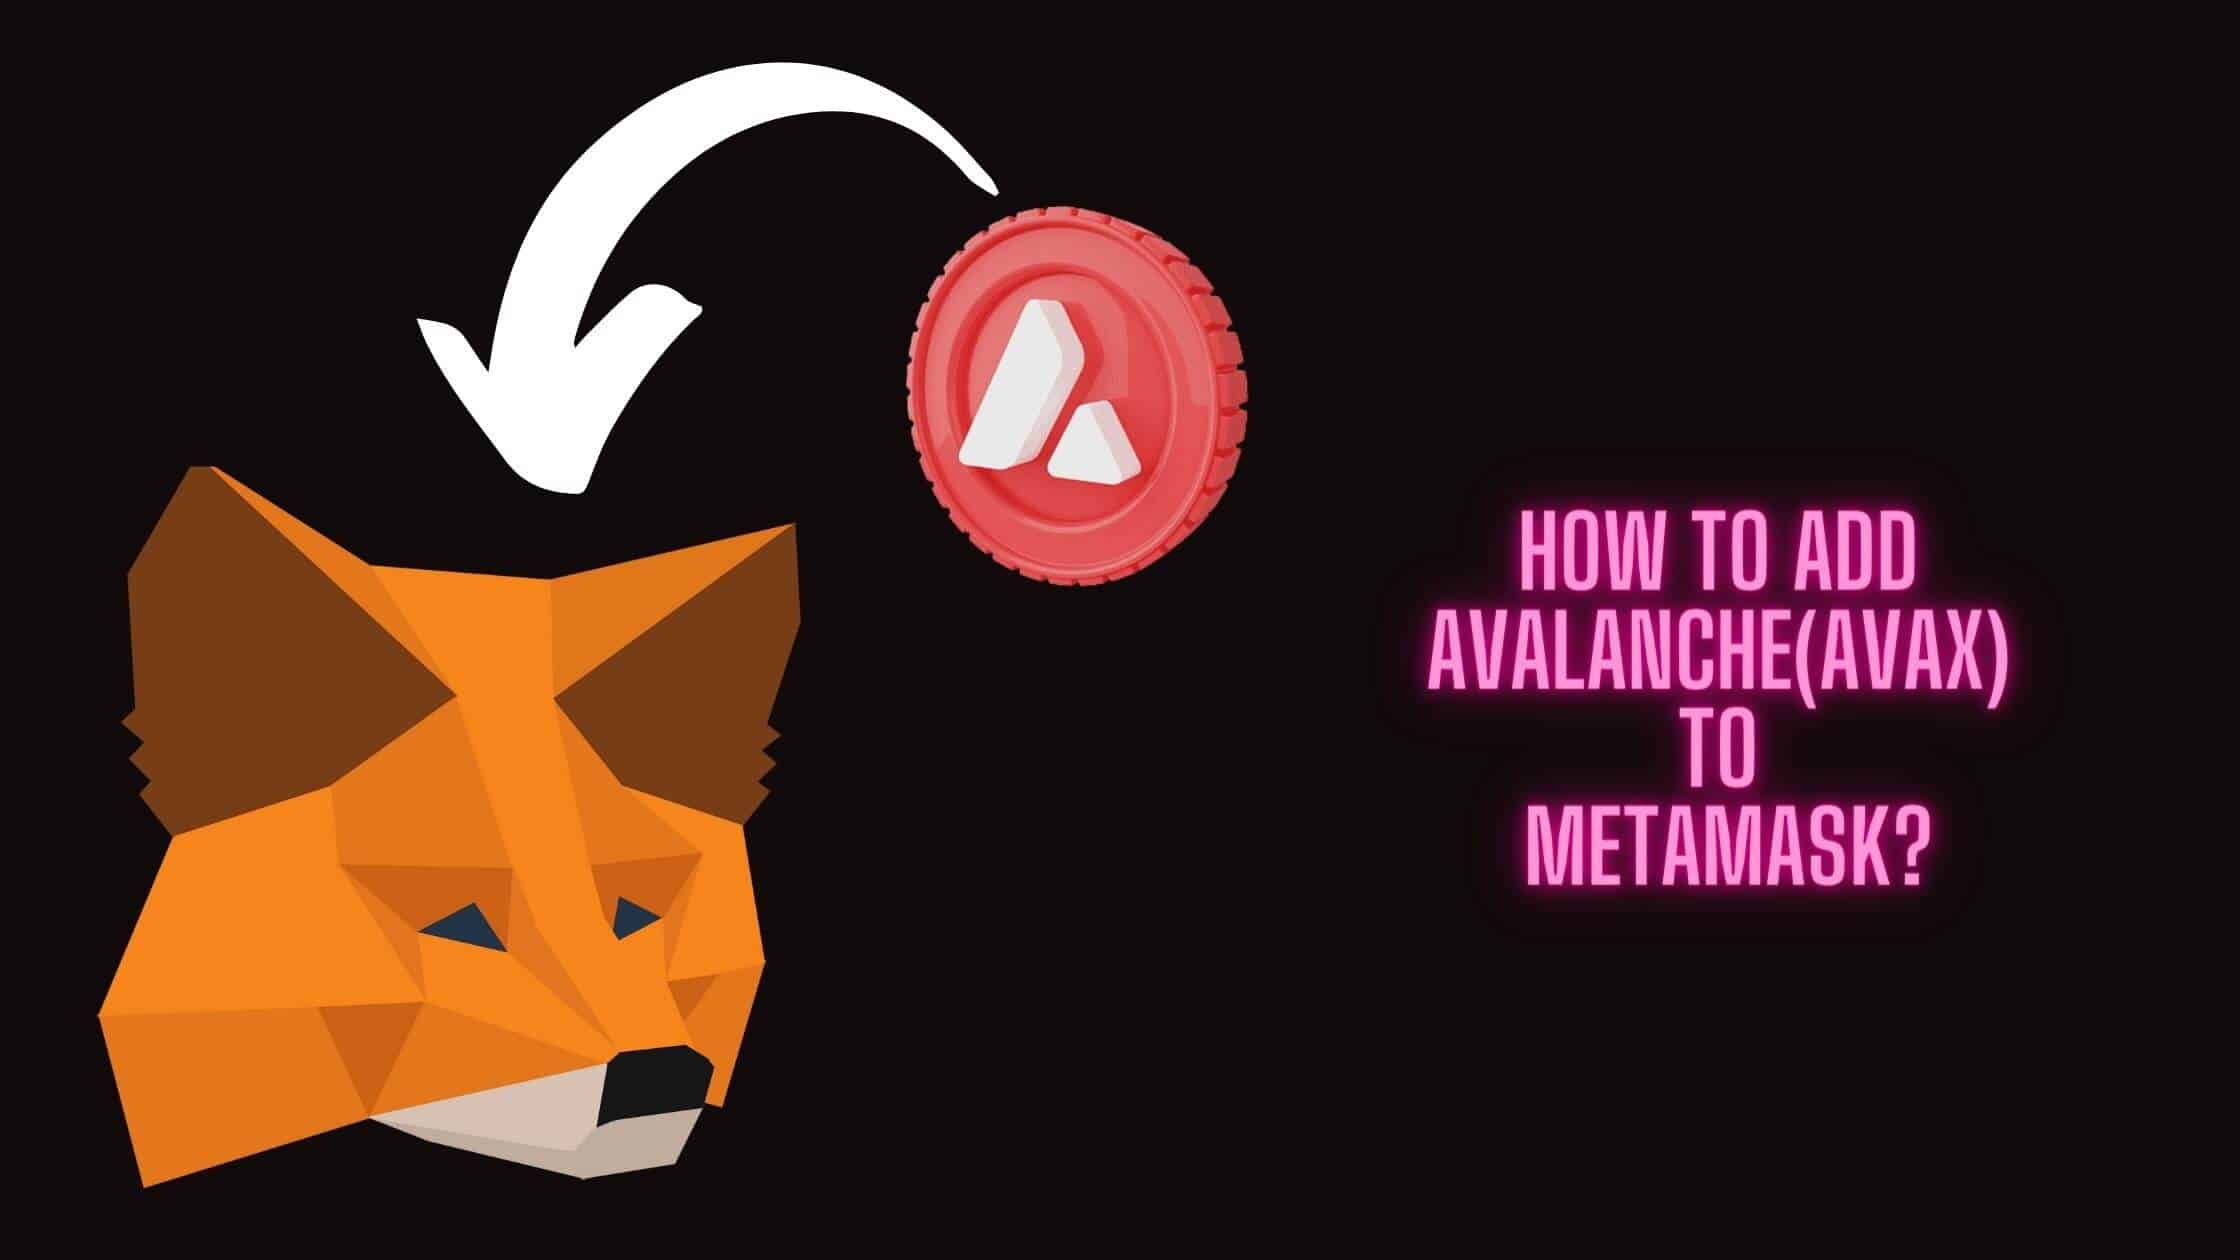 How Can Avalanche (AVAX) Be Added To Metamask Here Are The Easy Steps